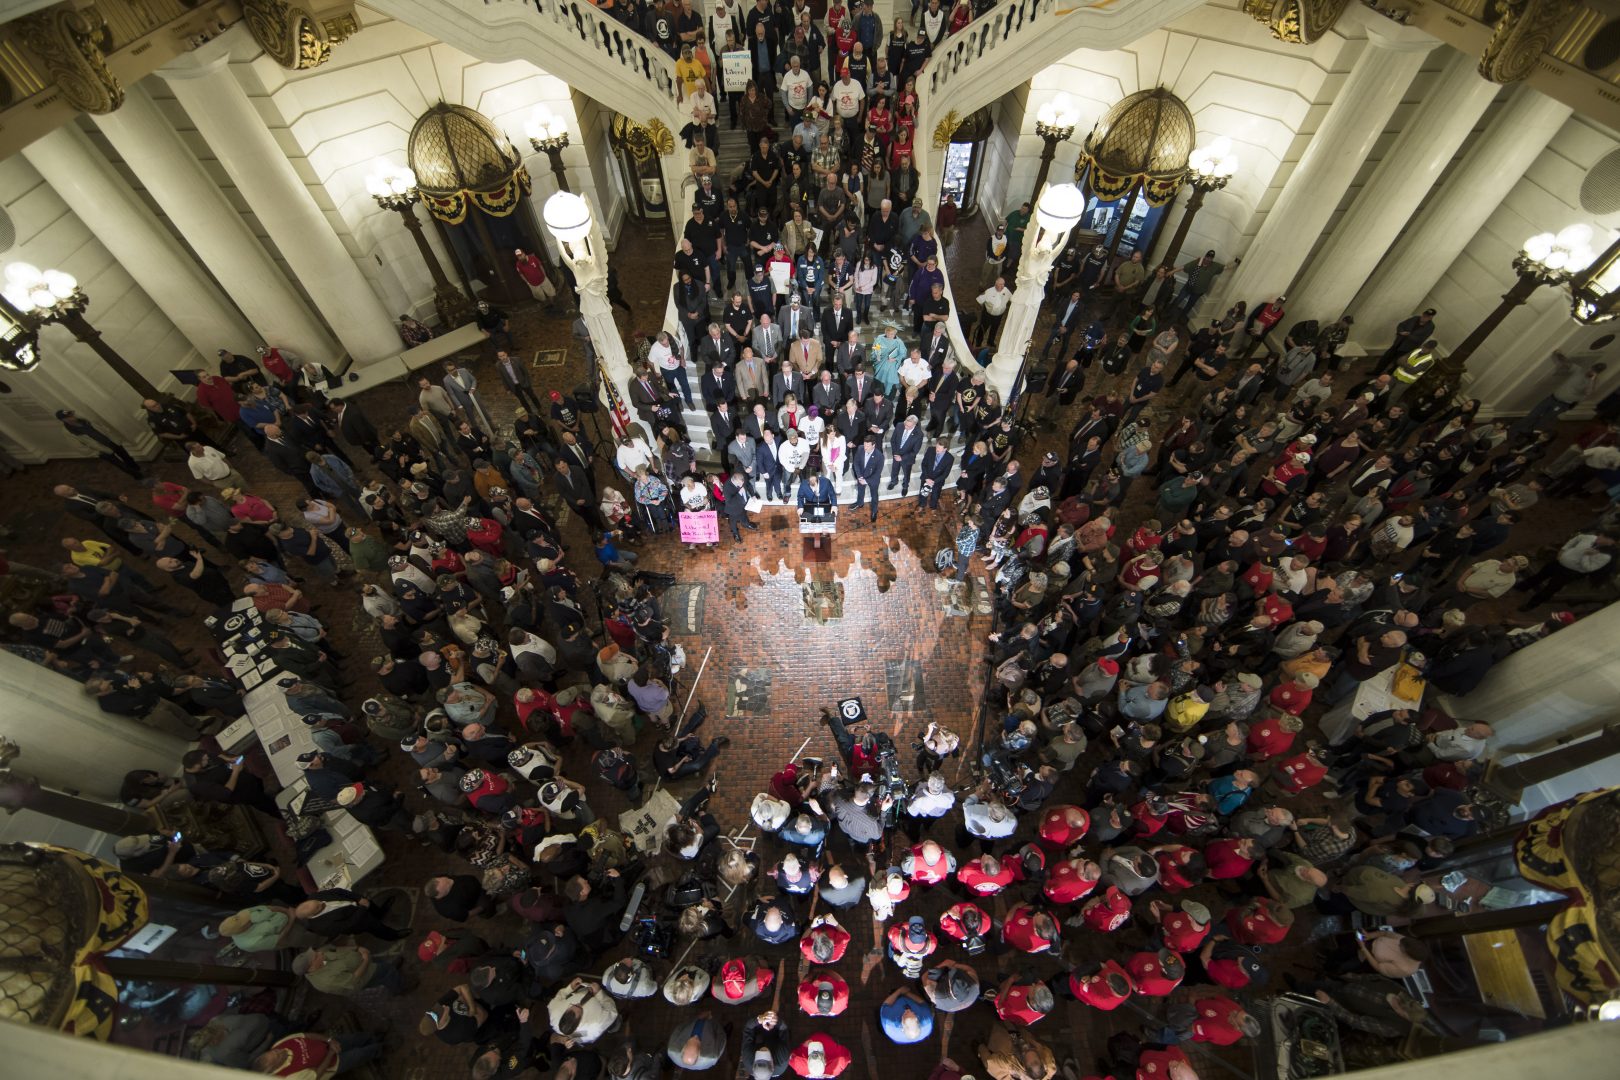 Gun rights advocates gather for an annual rally at the state Capitol in Harrisburg, Pa., Monday, May 6, 2019.